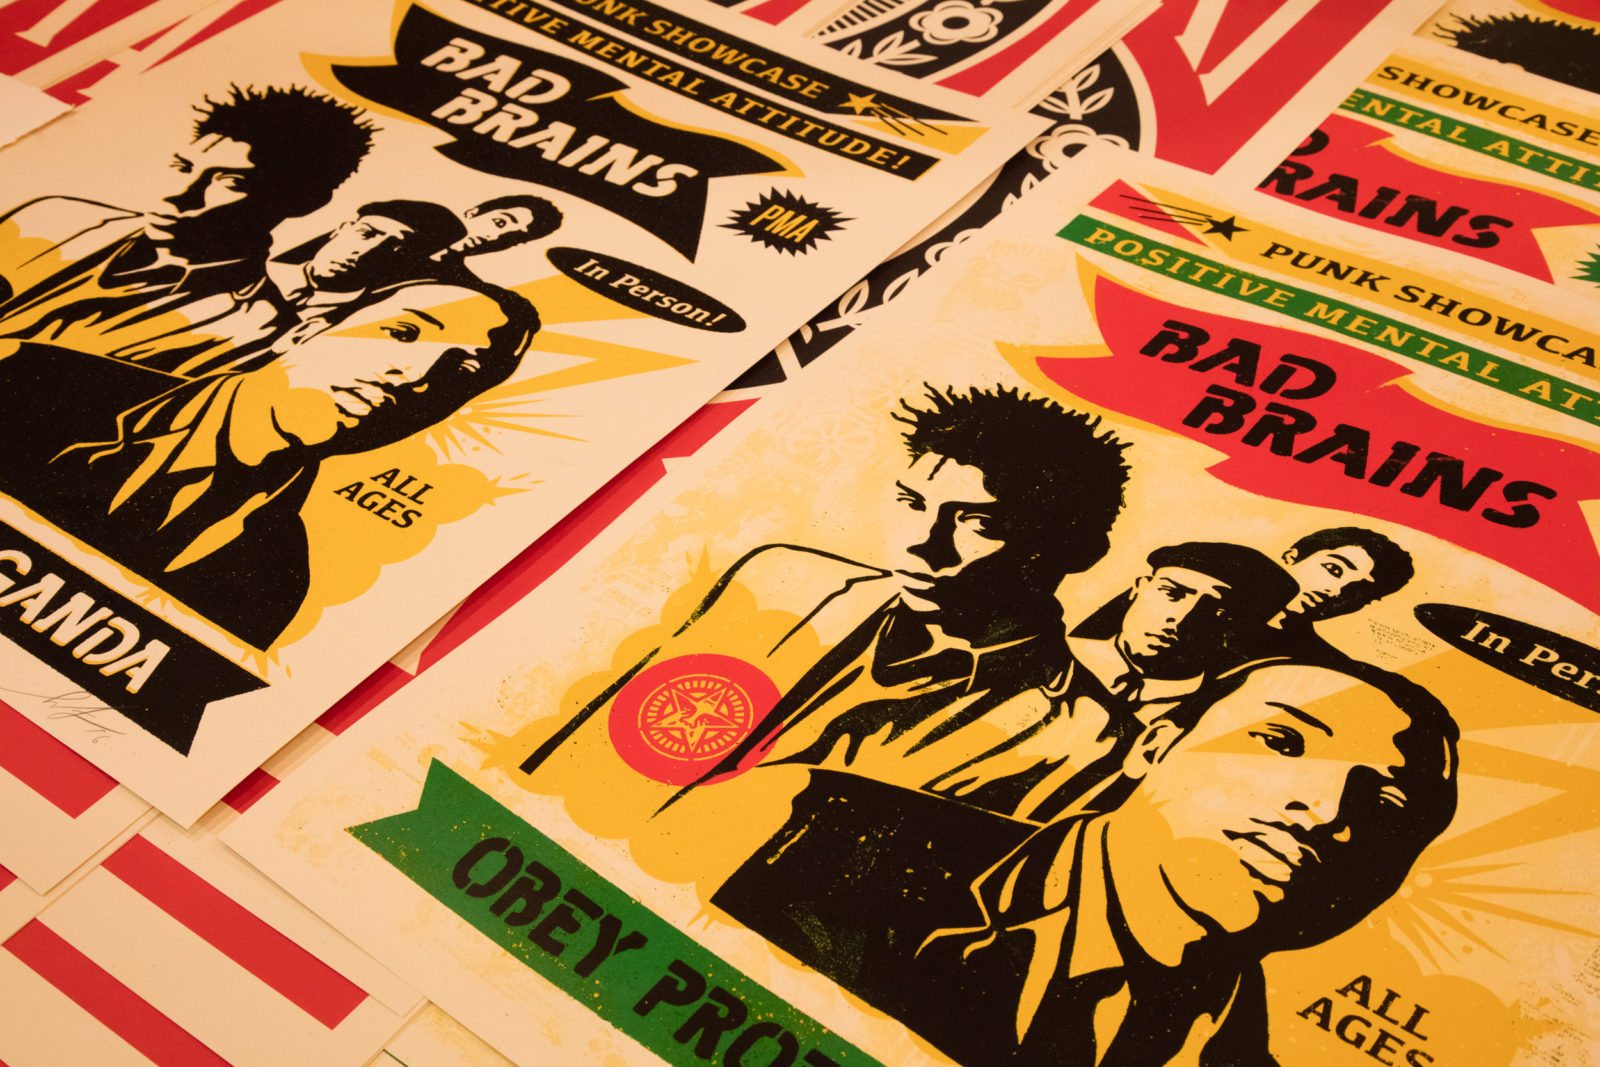 3 LIMITED EDITION BAD BRAINS PRINTS AVAIL. THIS SAT! - Obey Giant